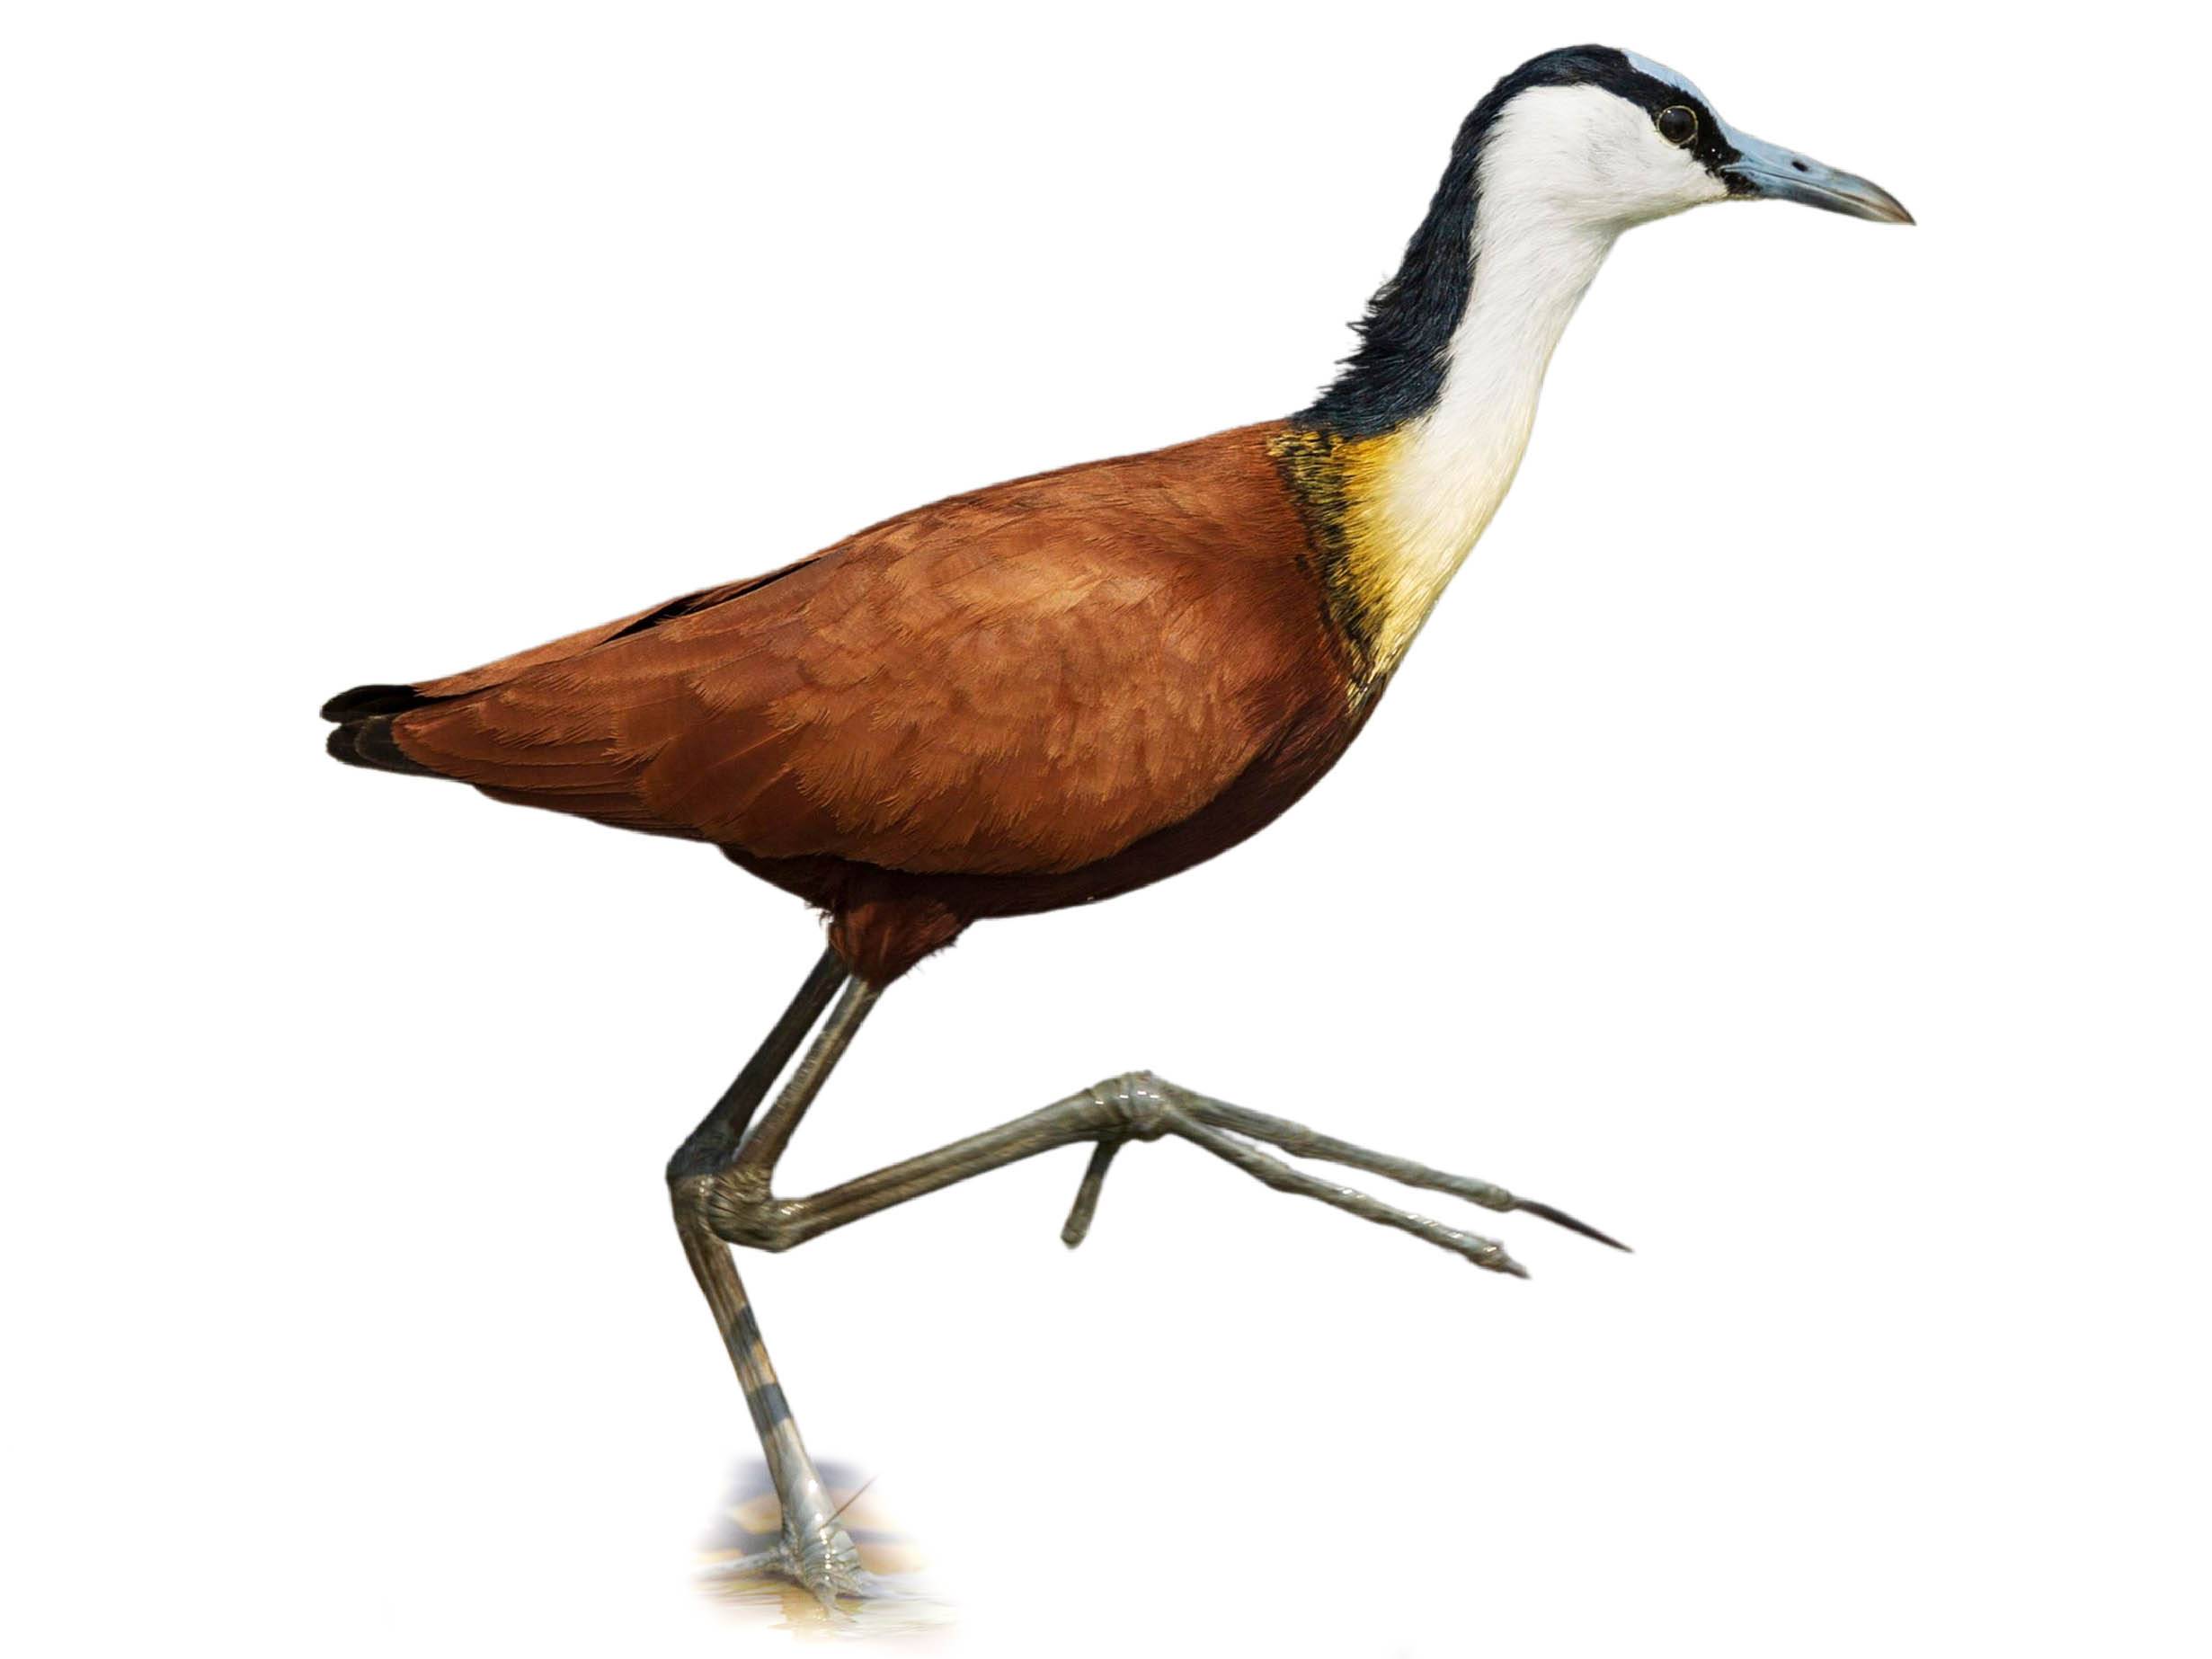 A photo of a African Jacana (Actophilornis africanus)